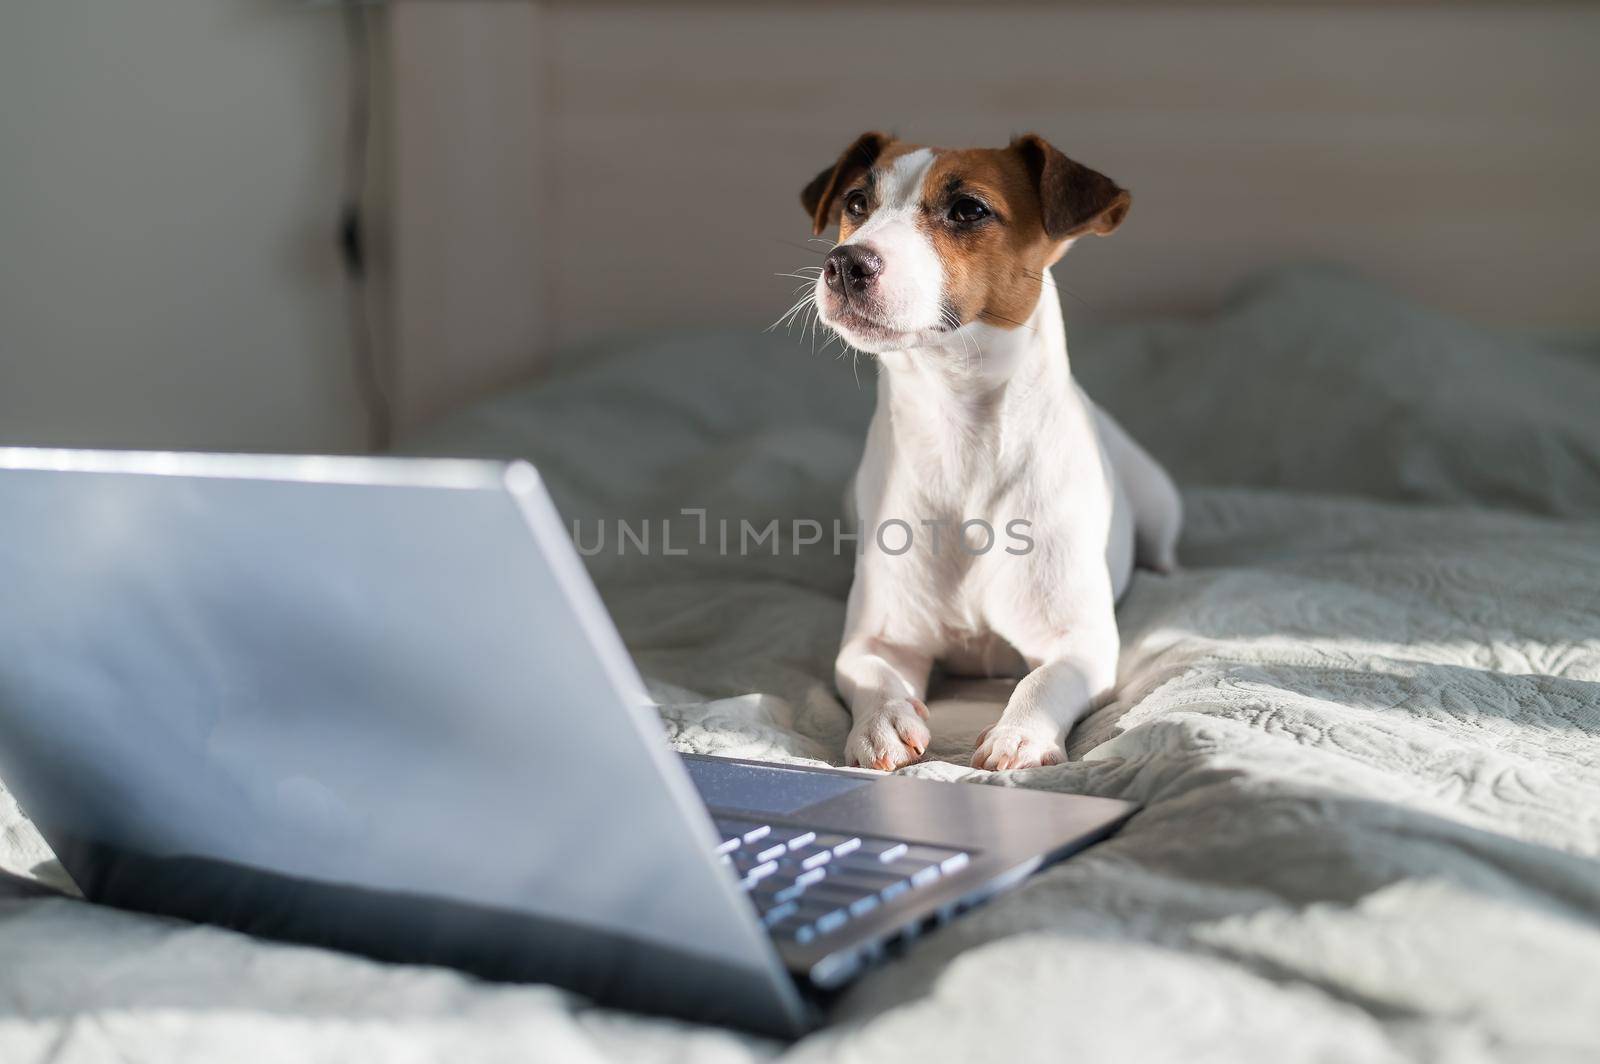 Smart dog jack russell terrier lies on the bed by the laptop